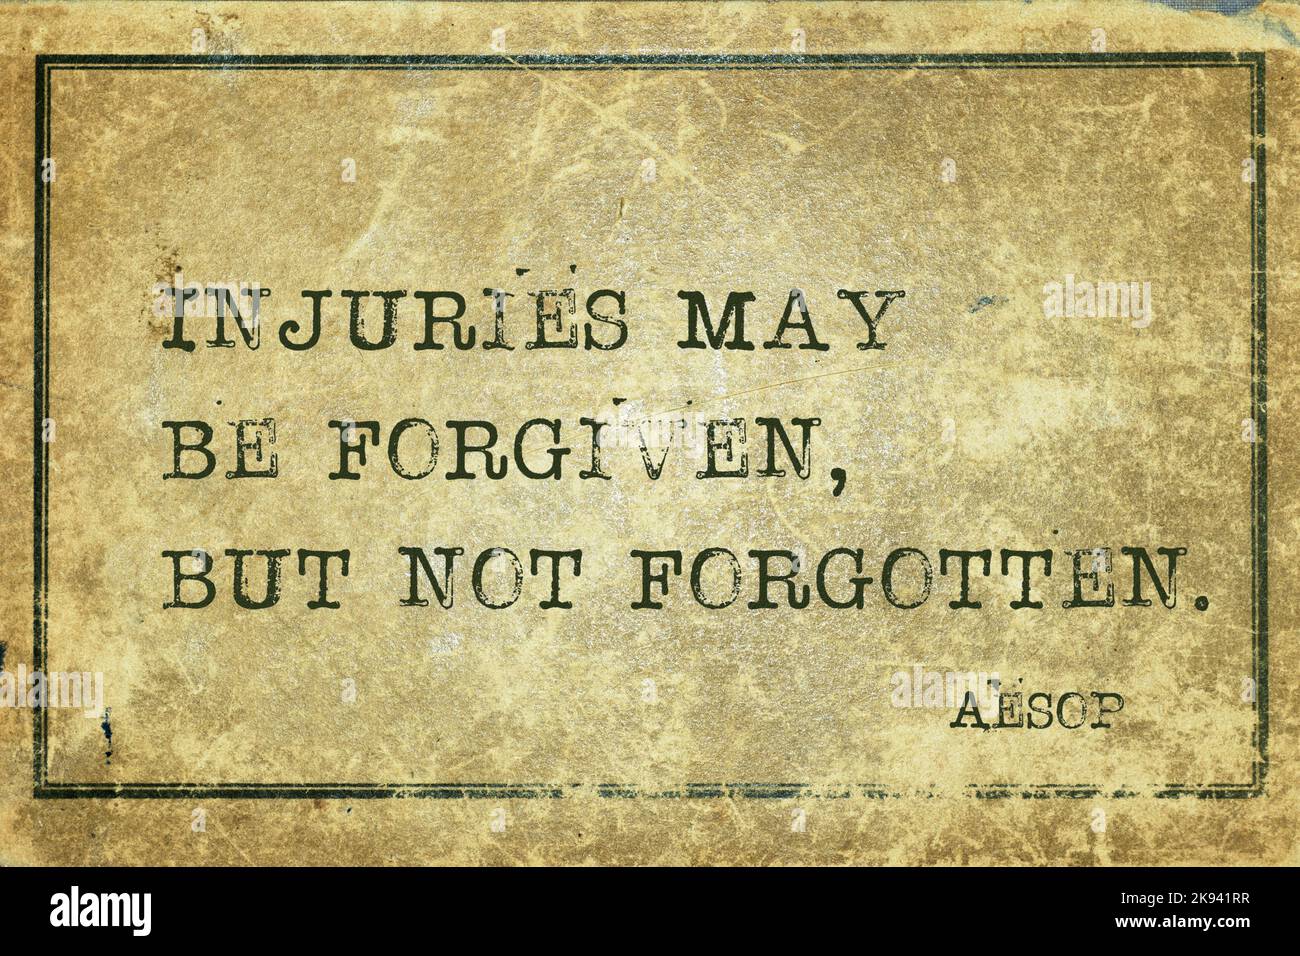 Injuries may be forgiven, but not forgotten - famous ancient Greek story teller Aesop quote printed on grunge vintage cardboard Stock Photo